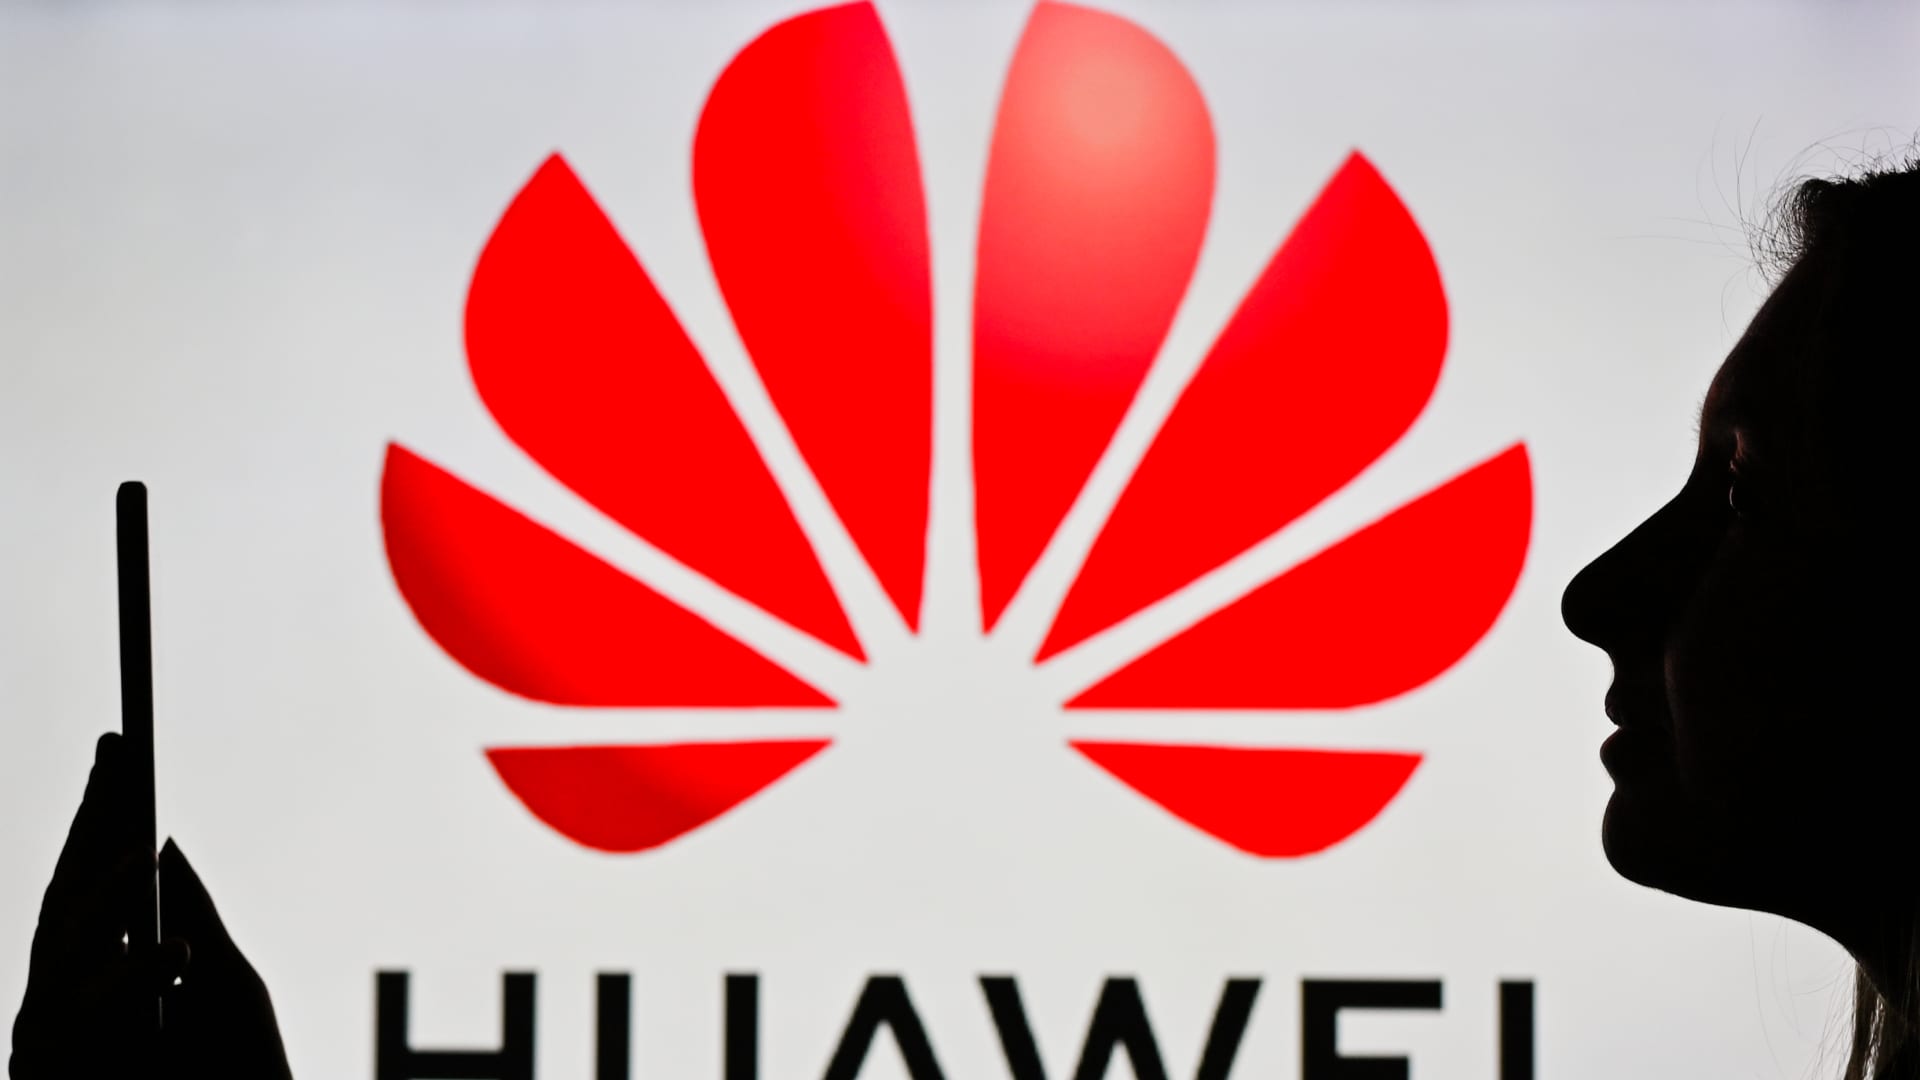 Huawei licenses 5G patents to rival as U.S. sanctions bite